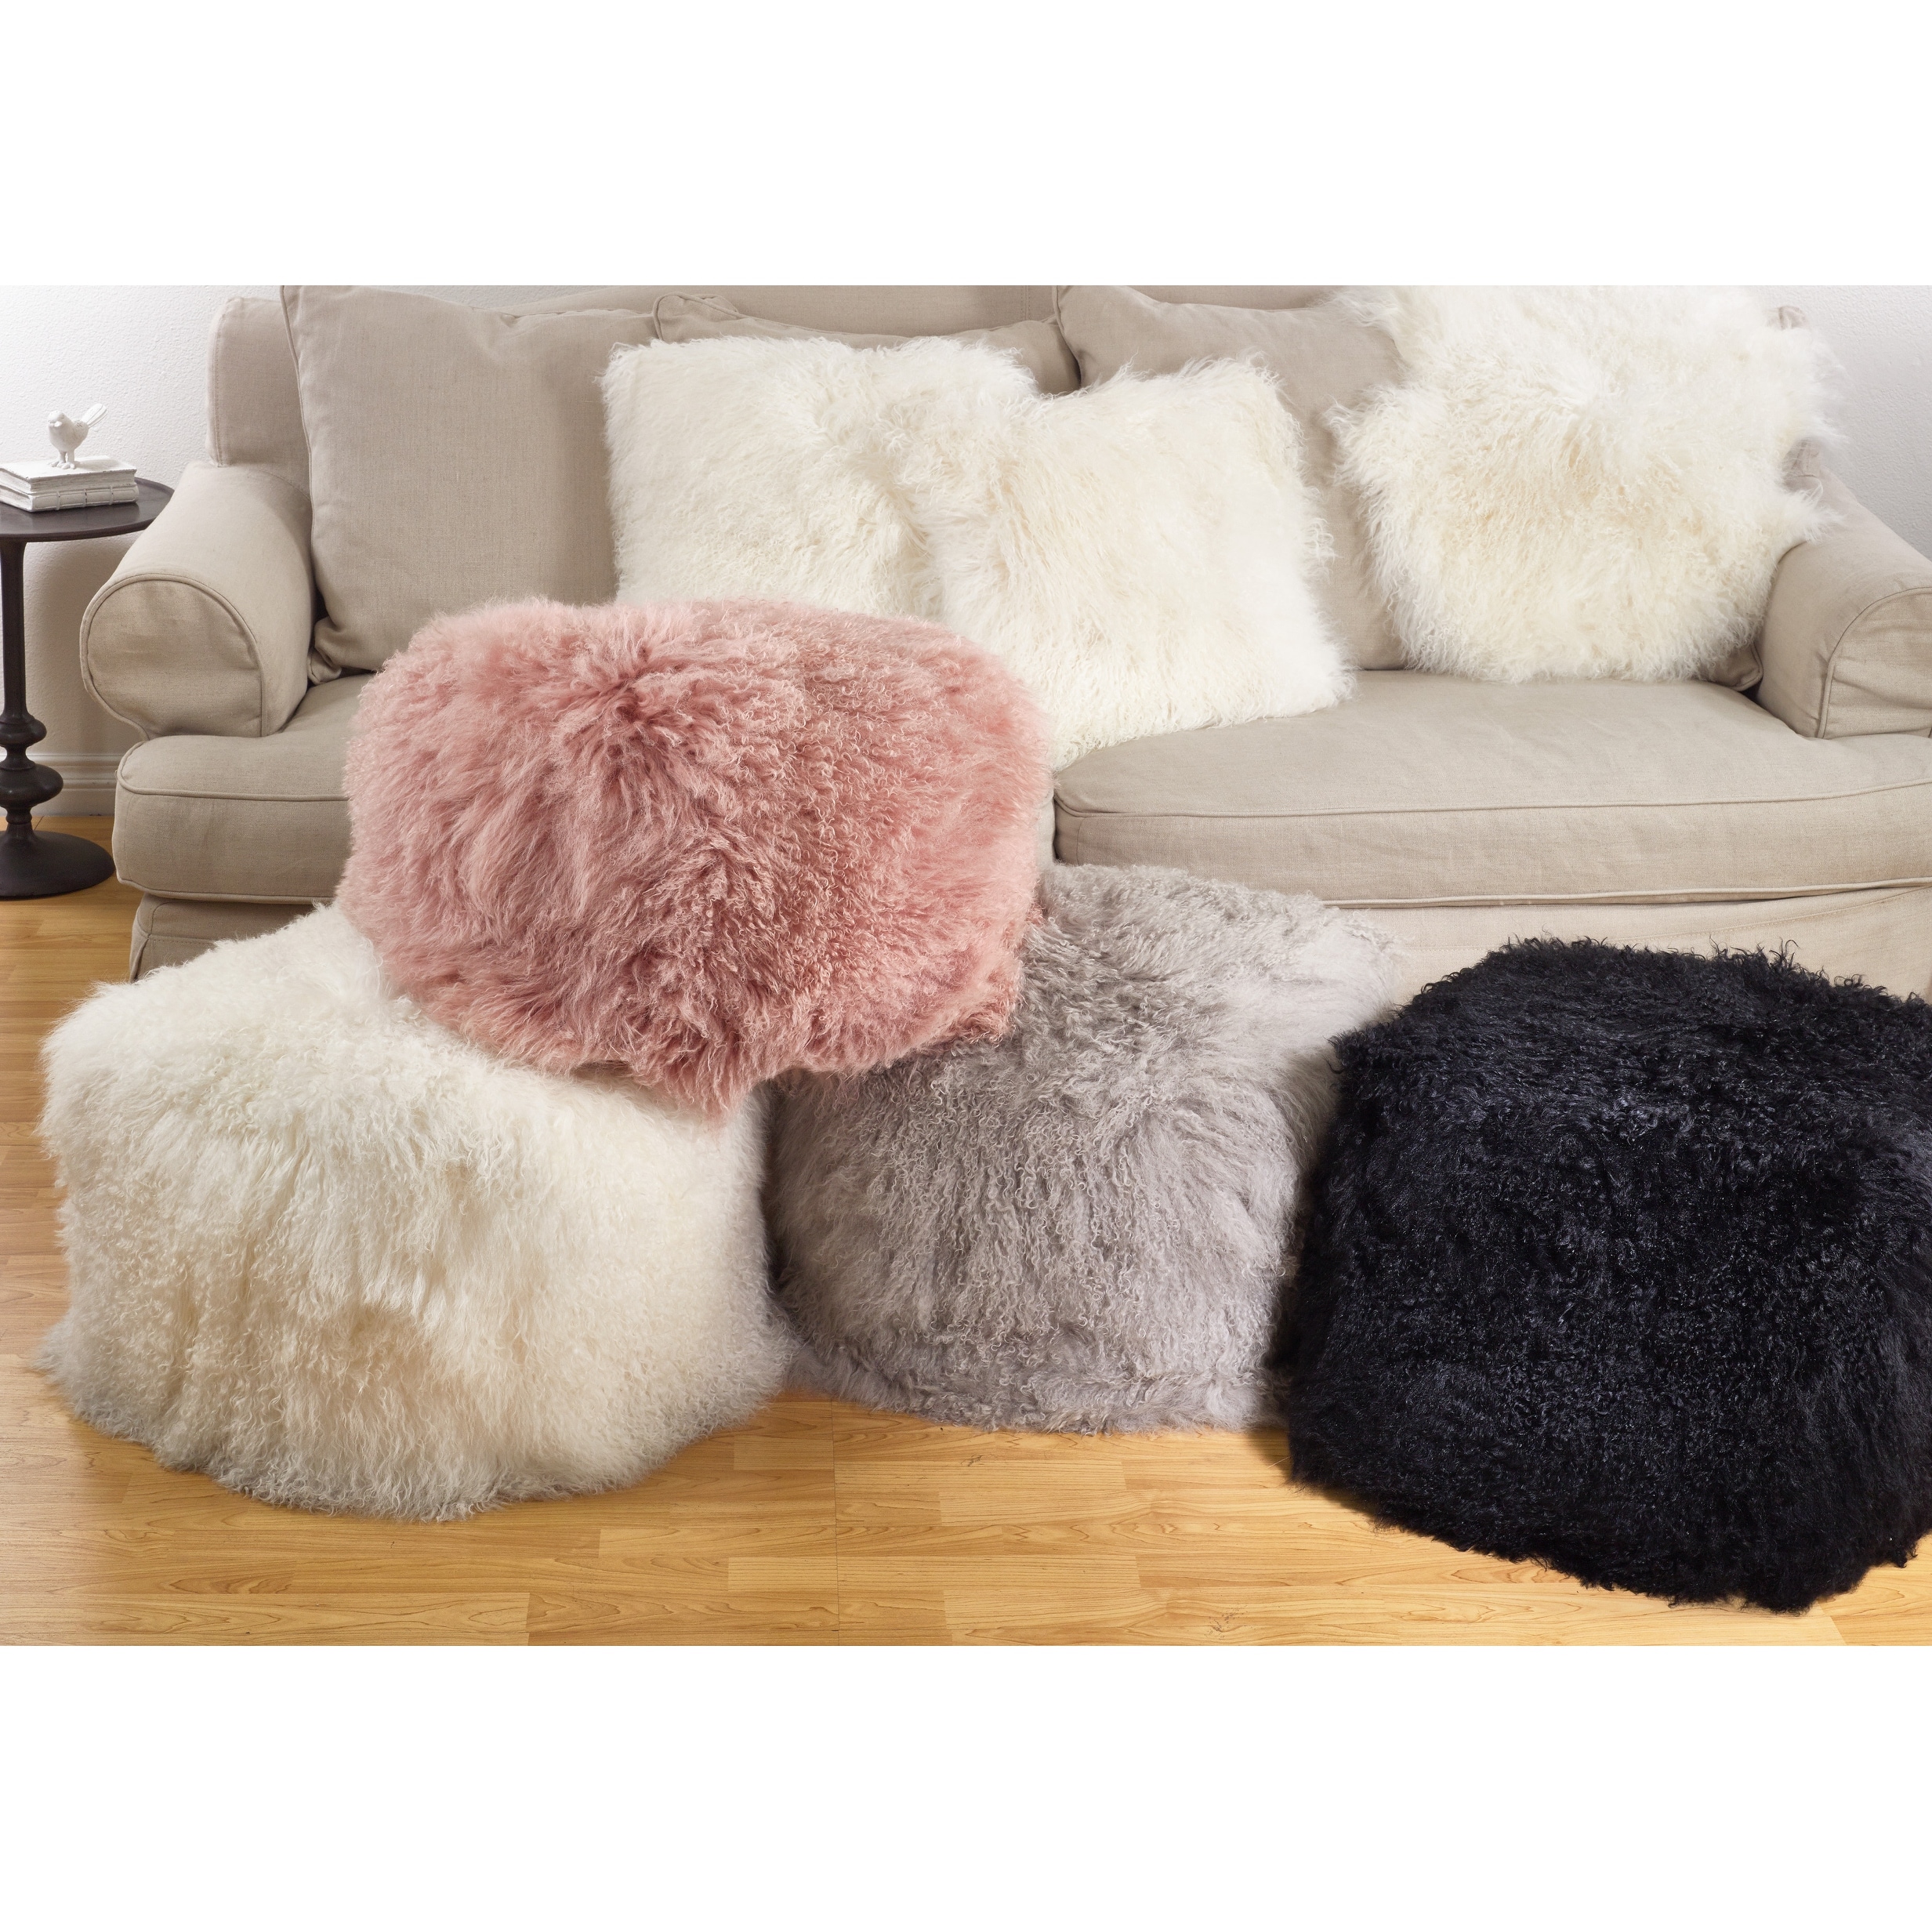 https://ak1.ostkcdn.com/images/products/is/images/direct/25f44bae6426a6812dcc3d189d02951f953be999/Mongolian-Lamb-Fur-Wool-Pouf-Ottoman.jpg